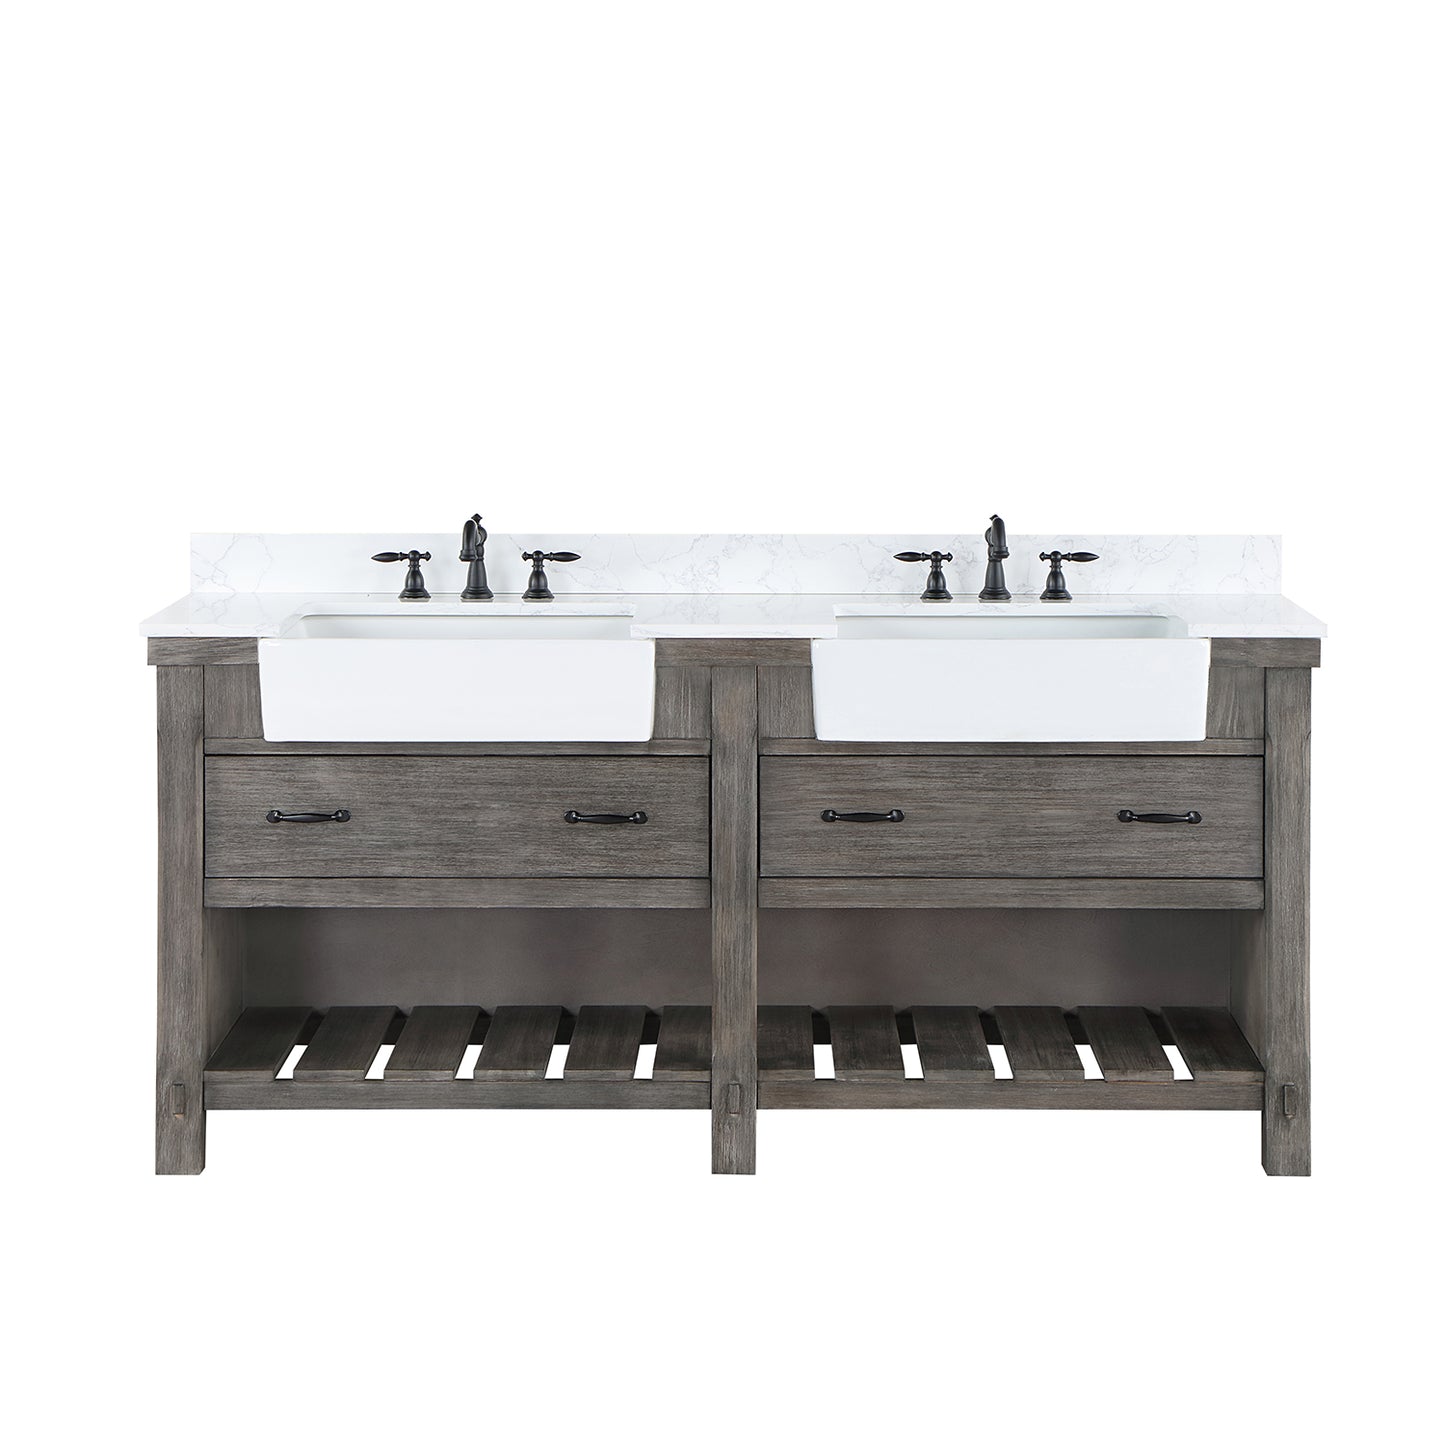 Villareal 72" Double Bath Vanity in Classical Grey with Composite Stone Top in White, White Farmhouse Basin